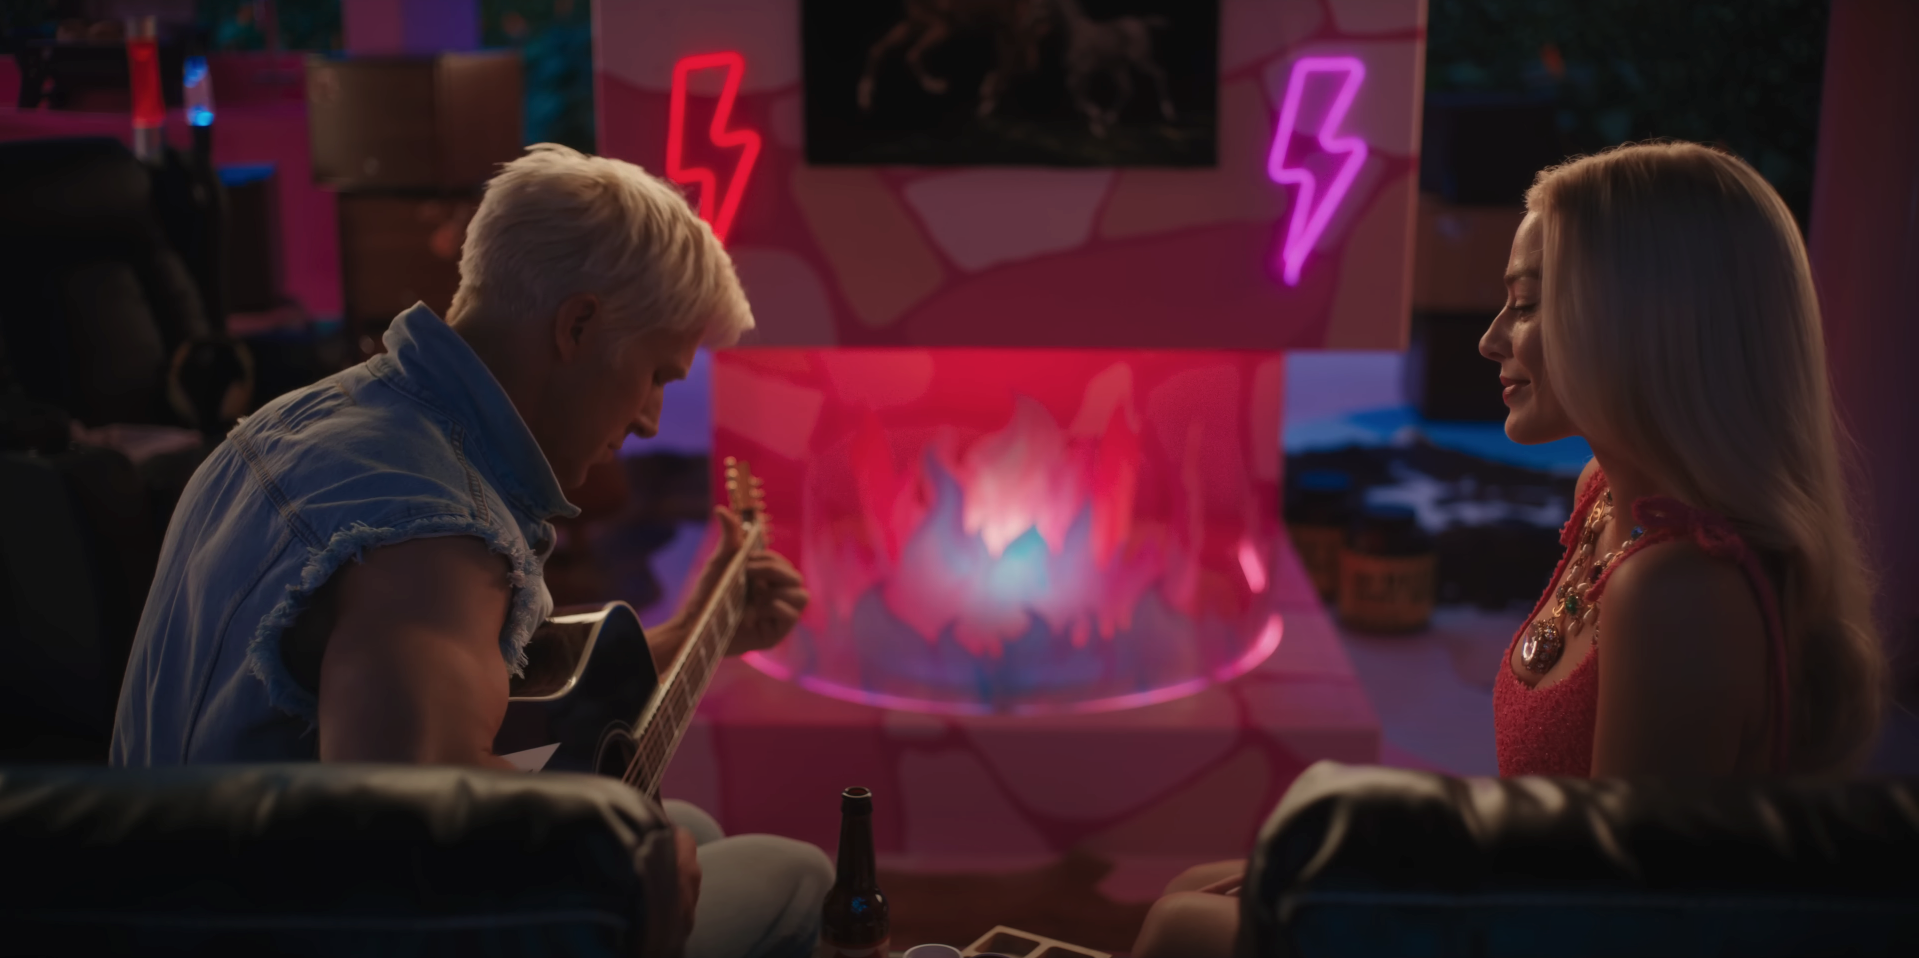 Ryan Gosling as Ken playing the guitar and serenading Barbie in a scene from &quot;Barbie&quot;